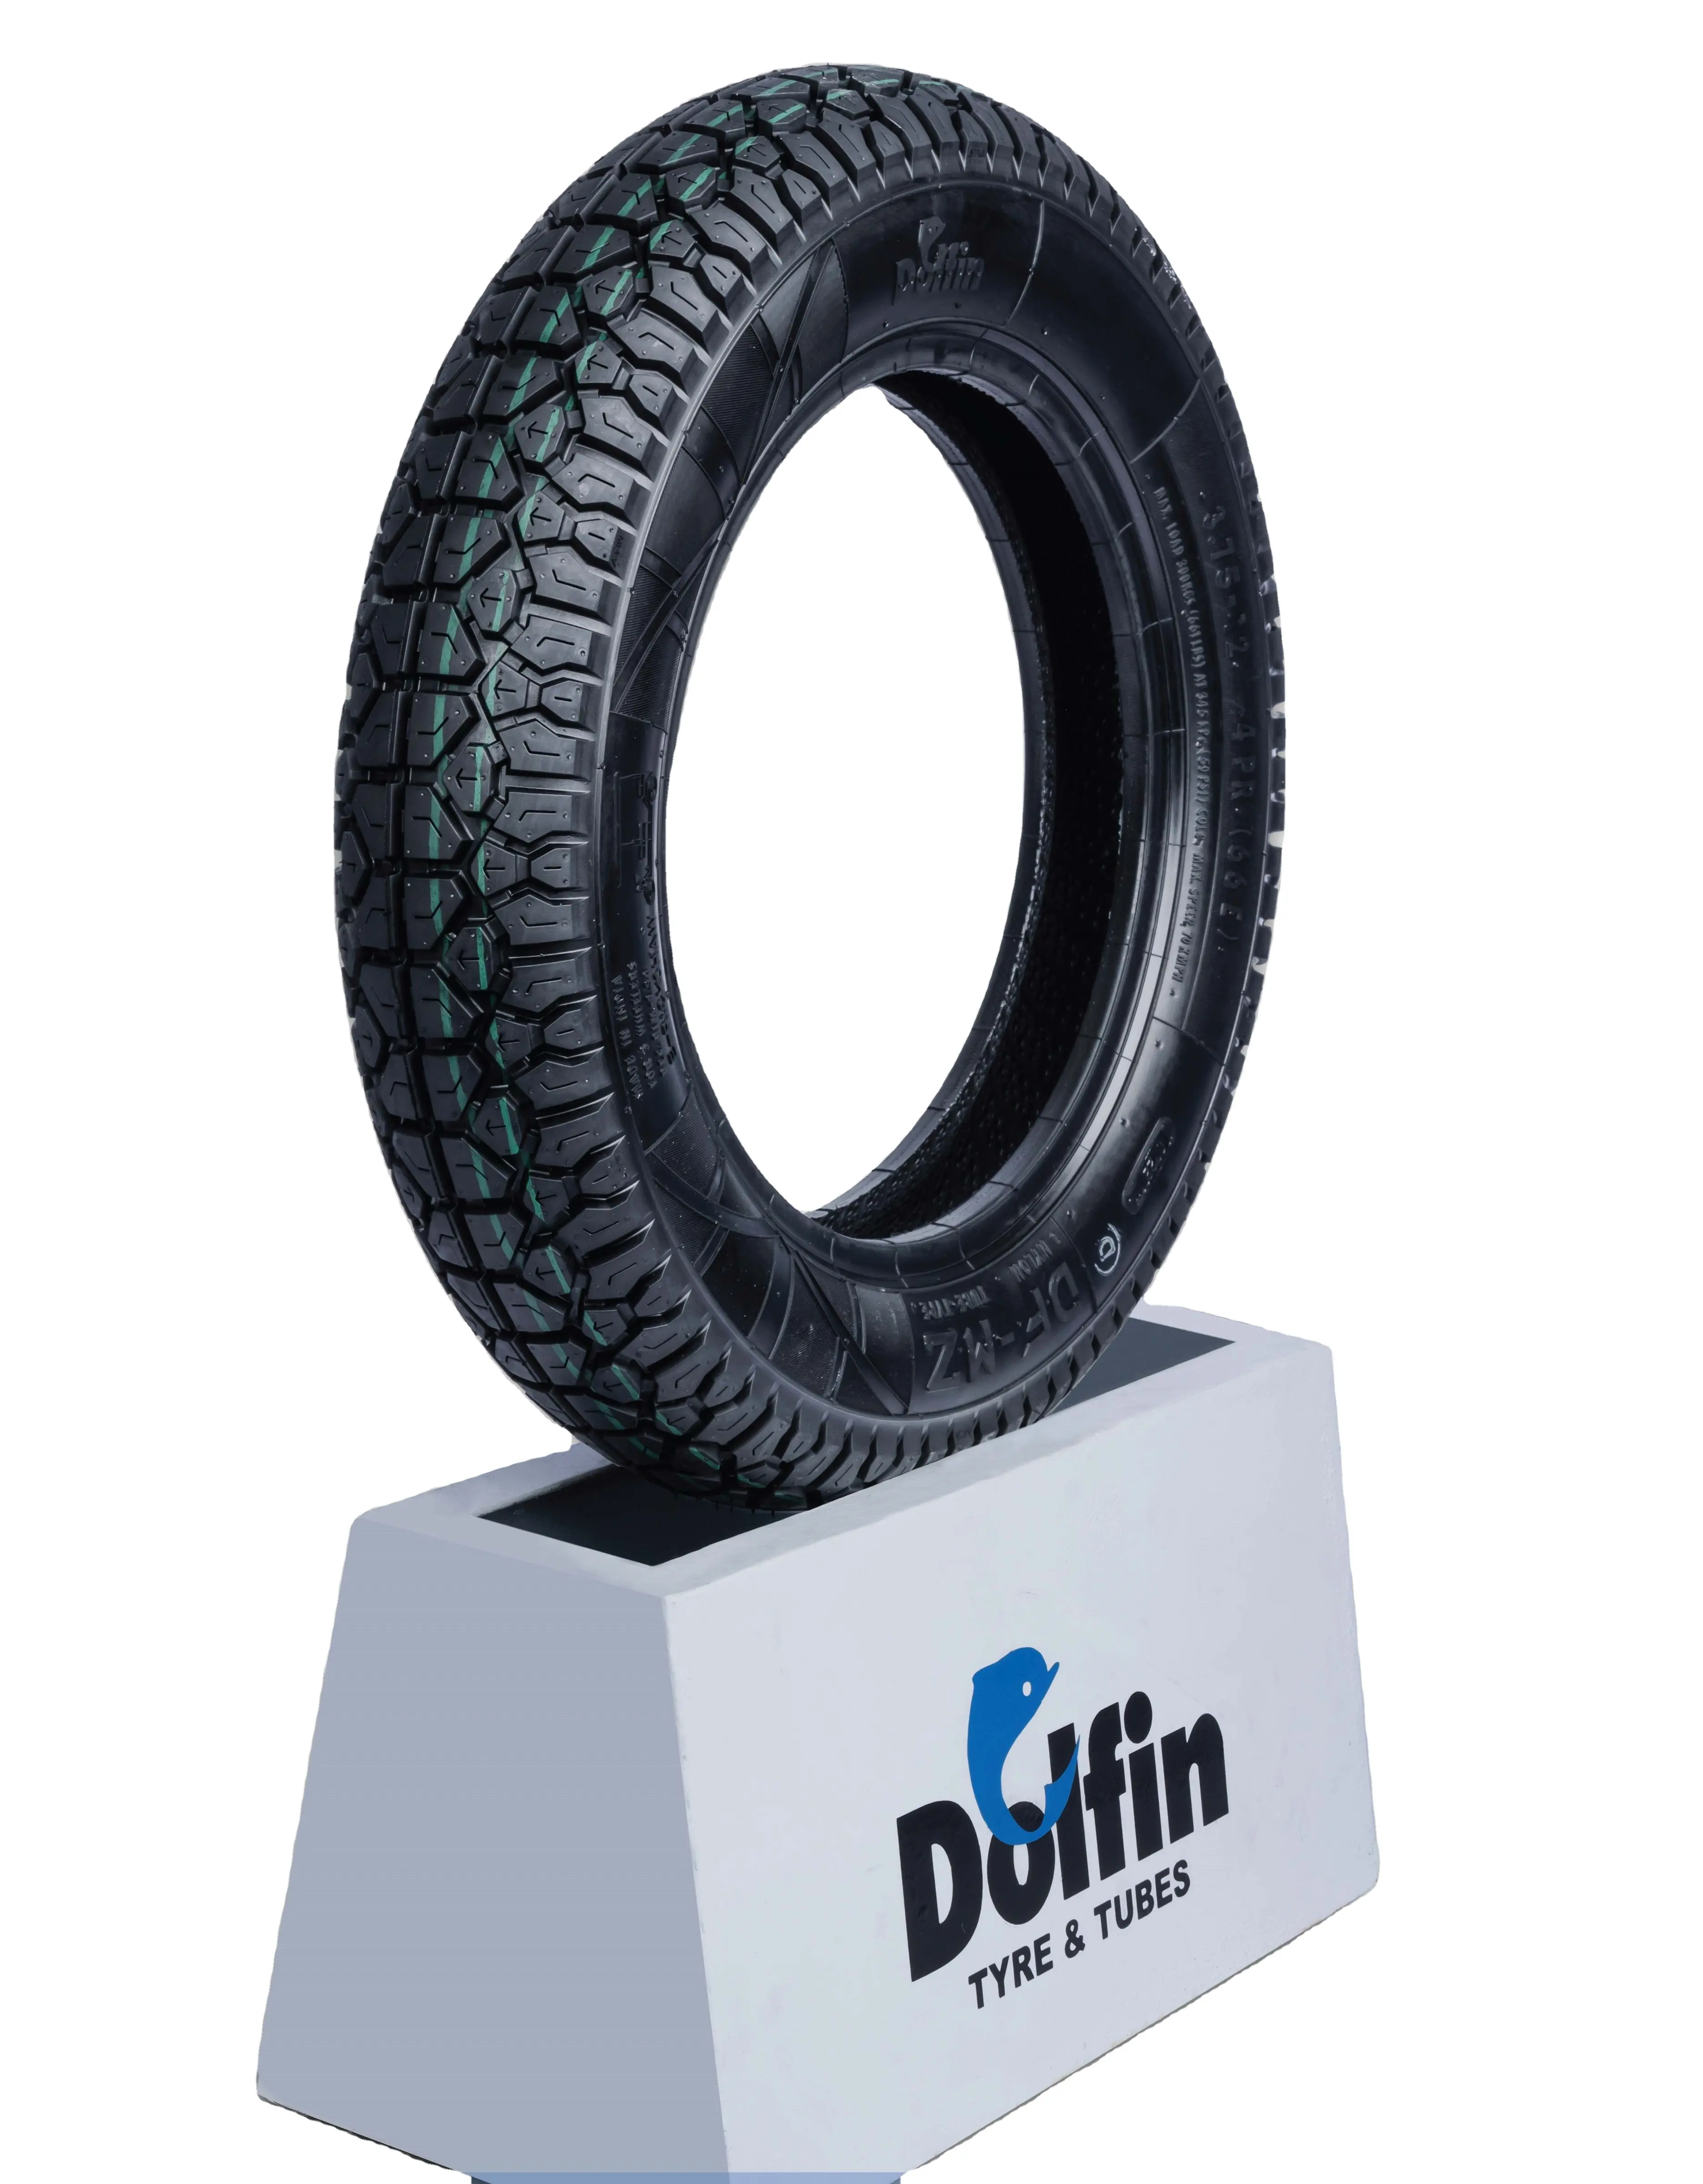 Size 3.00-18 Rear Weatherproof and Zig Zag Safe Dolfin Automotive Bike and Motorcycle Tyres at Wholesale Price Made in India